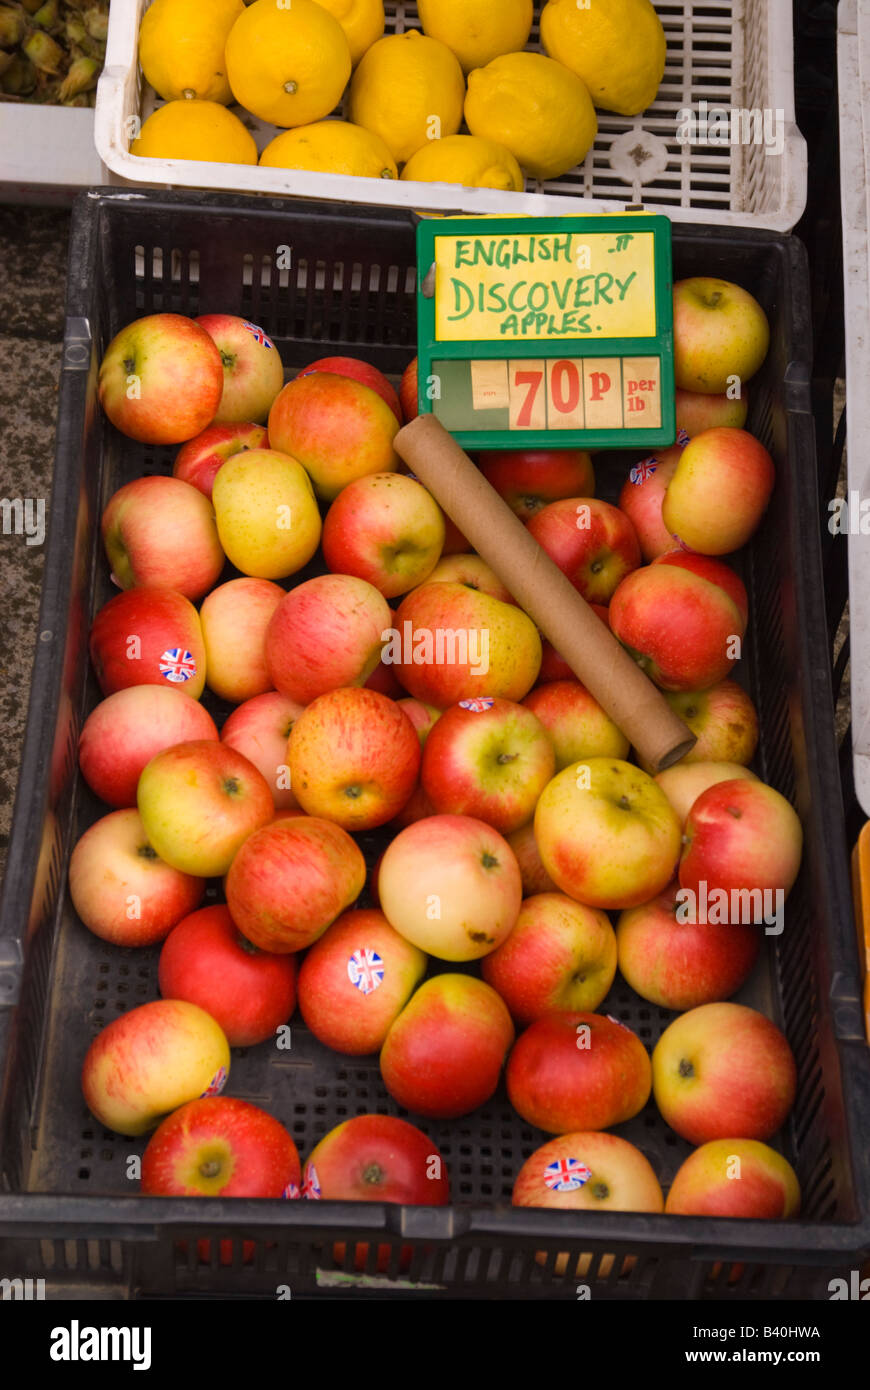 Discovery apples for sale outside Uk greengrocers Stock Photo